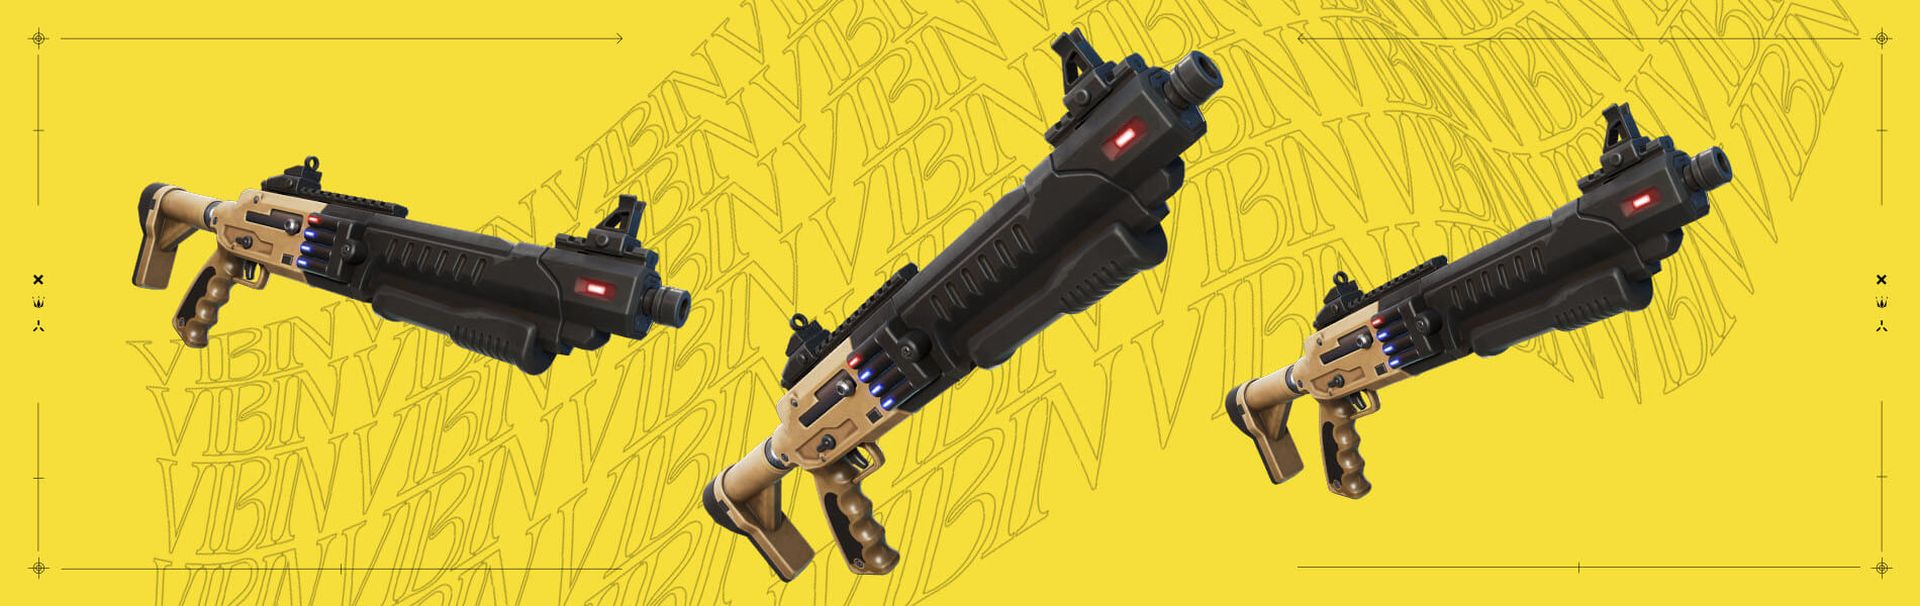 In this article, we are going to be covering what is new in Fortnite 21.30 update, so you know what will be added to the popular battle royale game.